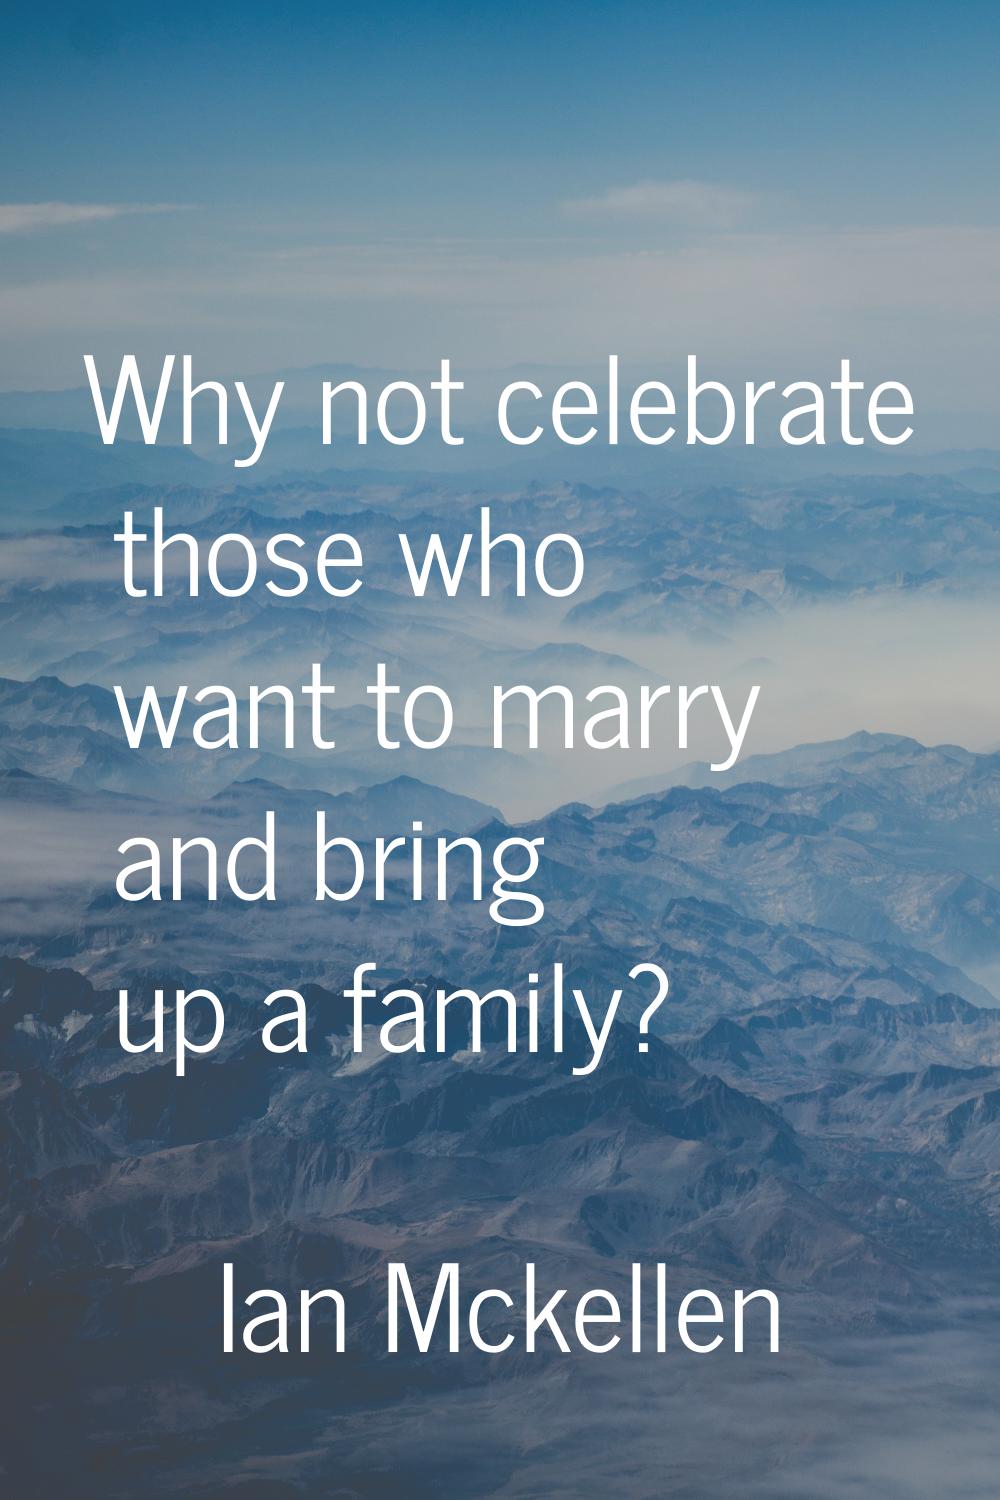 Why not celebrate those who want to marry and bring up a family?